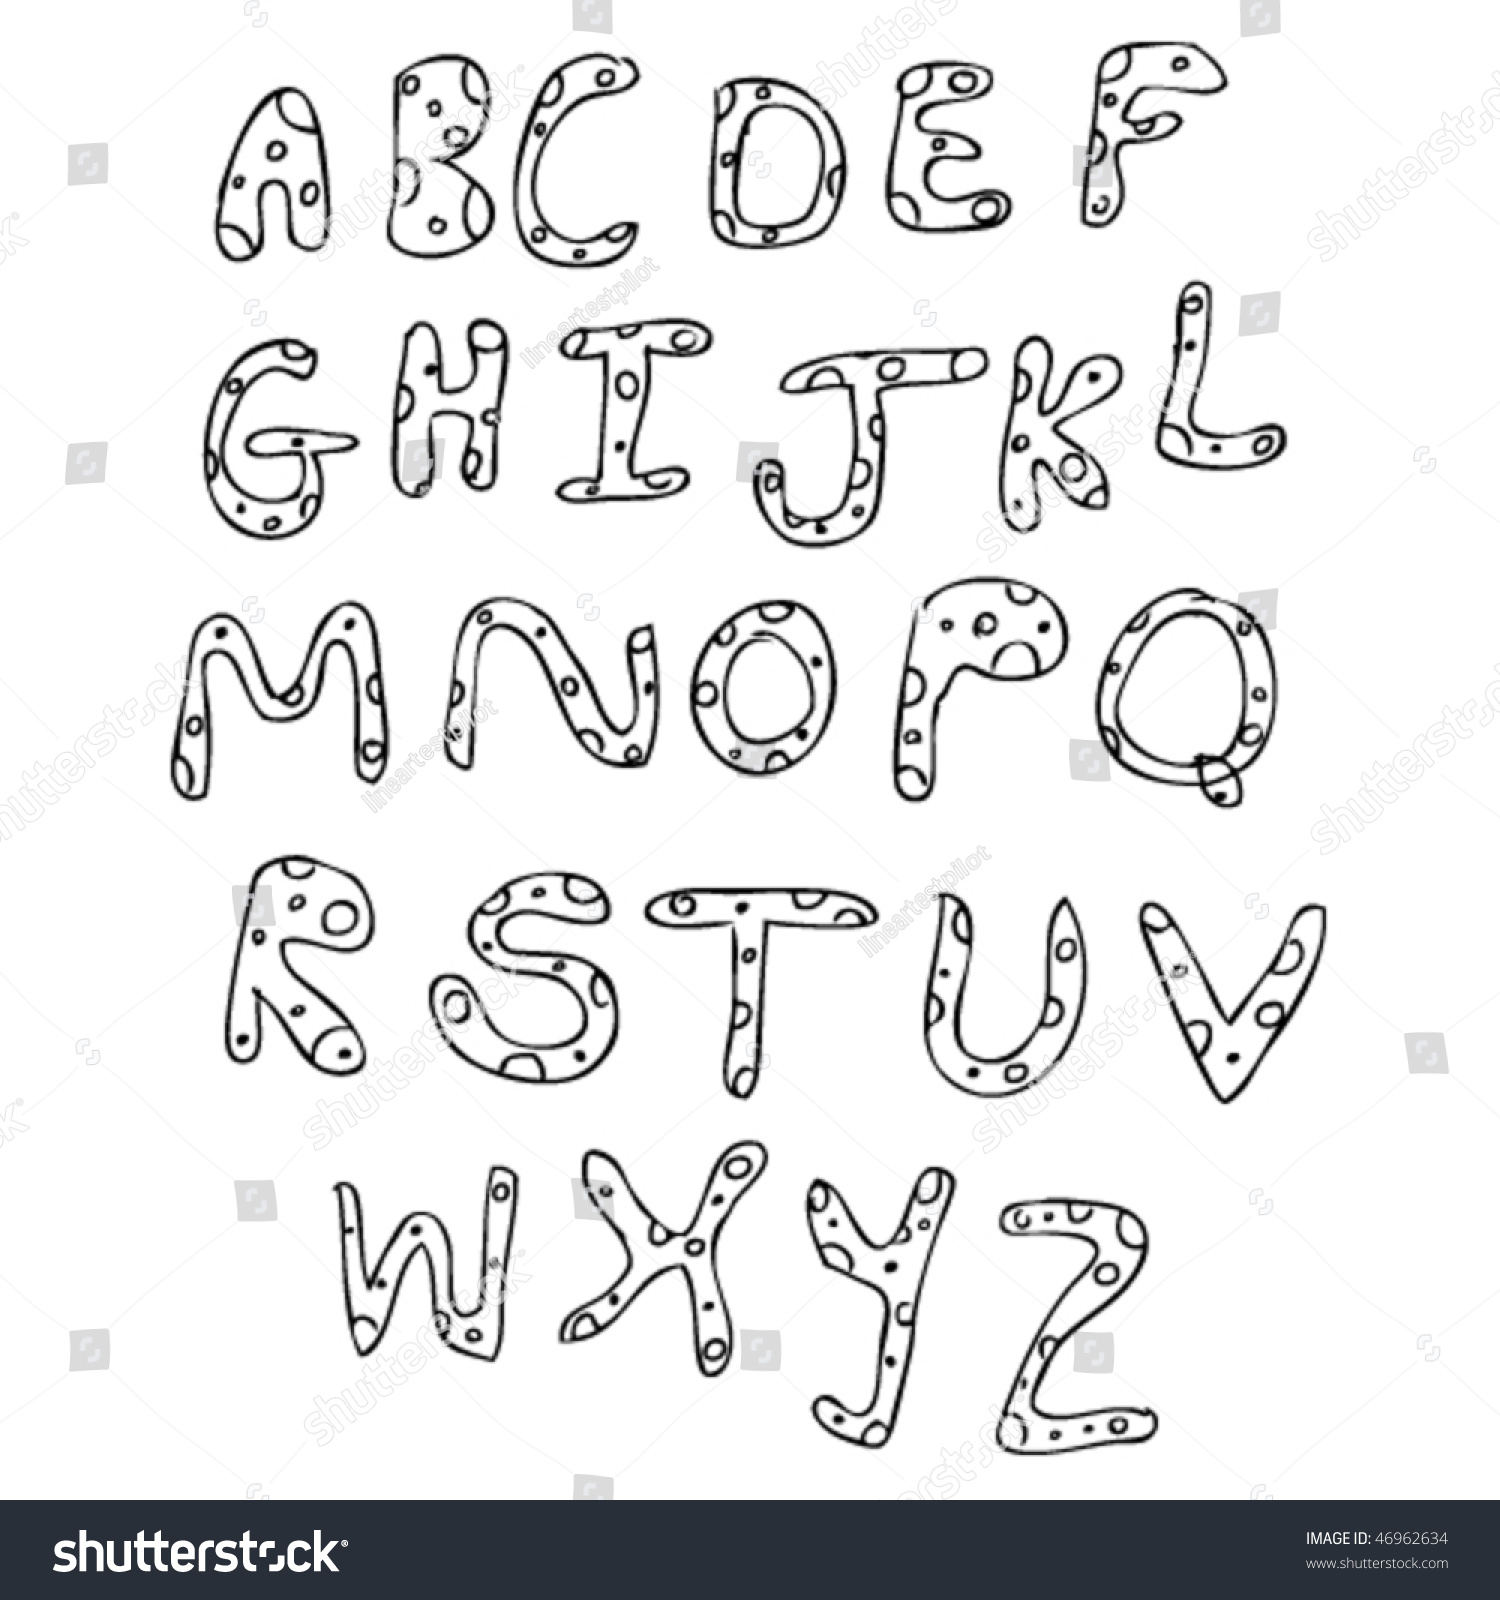 Quirky Ink Drawing In Kid'S Style Of The Alphabet Stock Vector ...